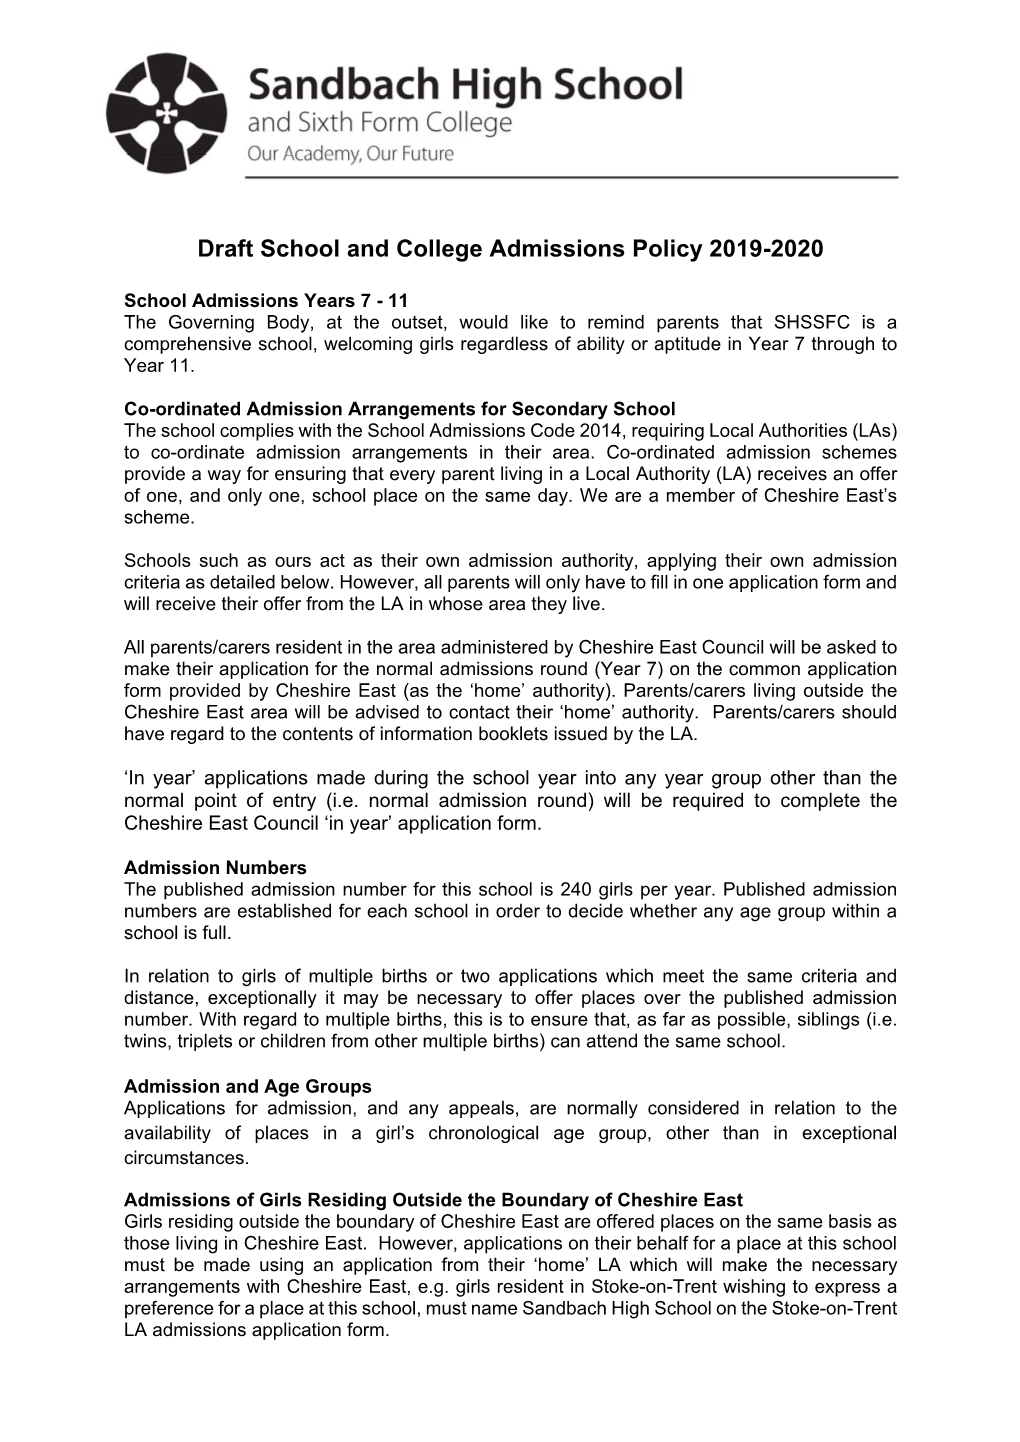 Draft School and College Admissions Policy 2019-2020